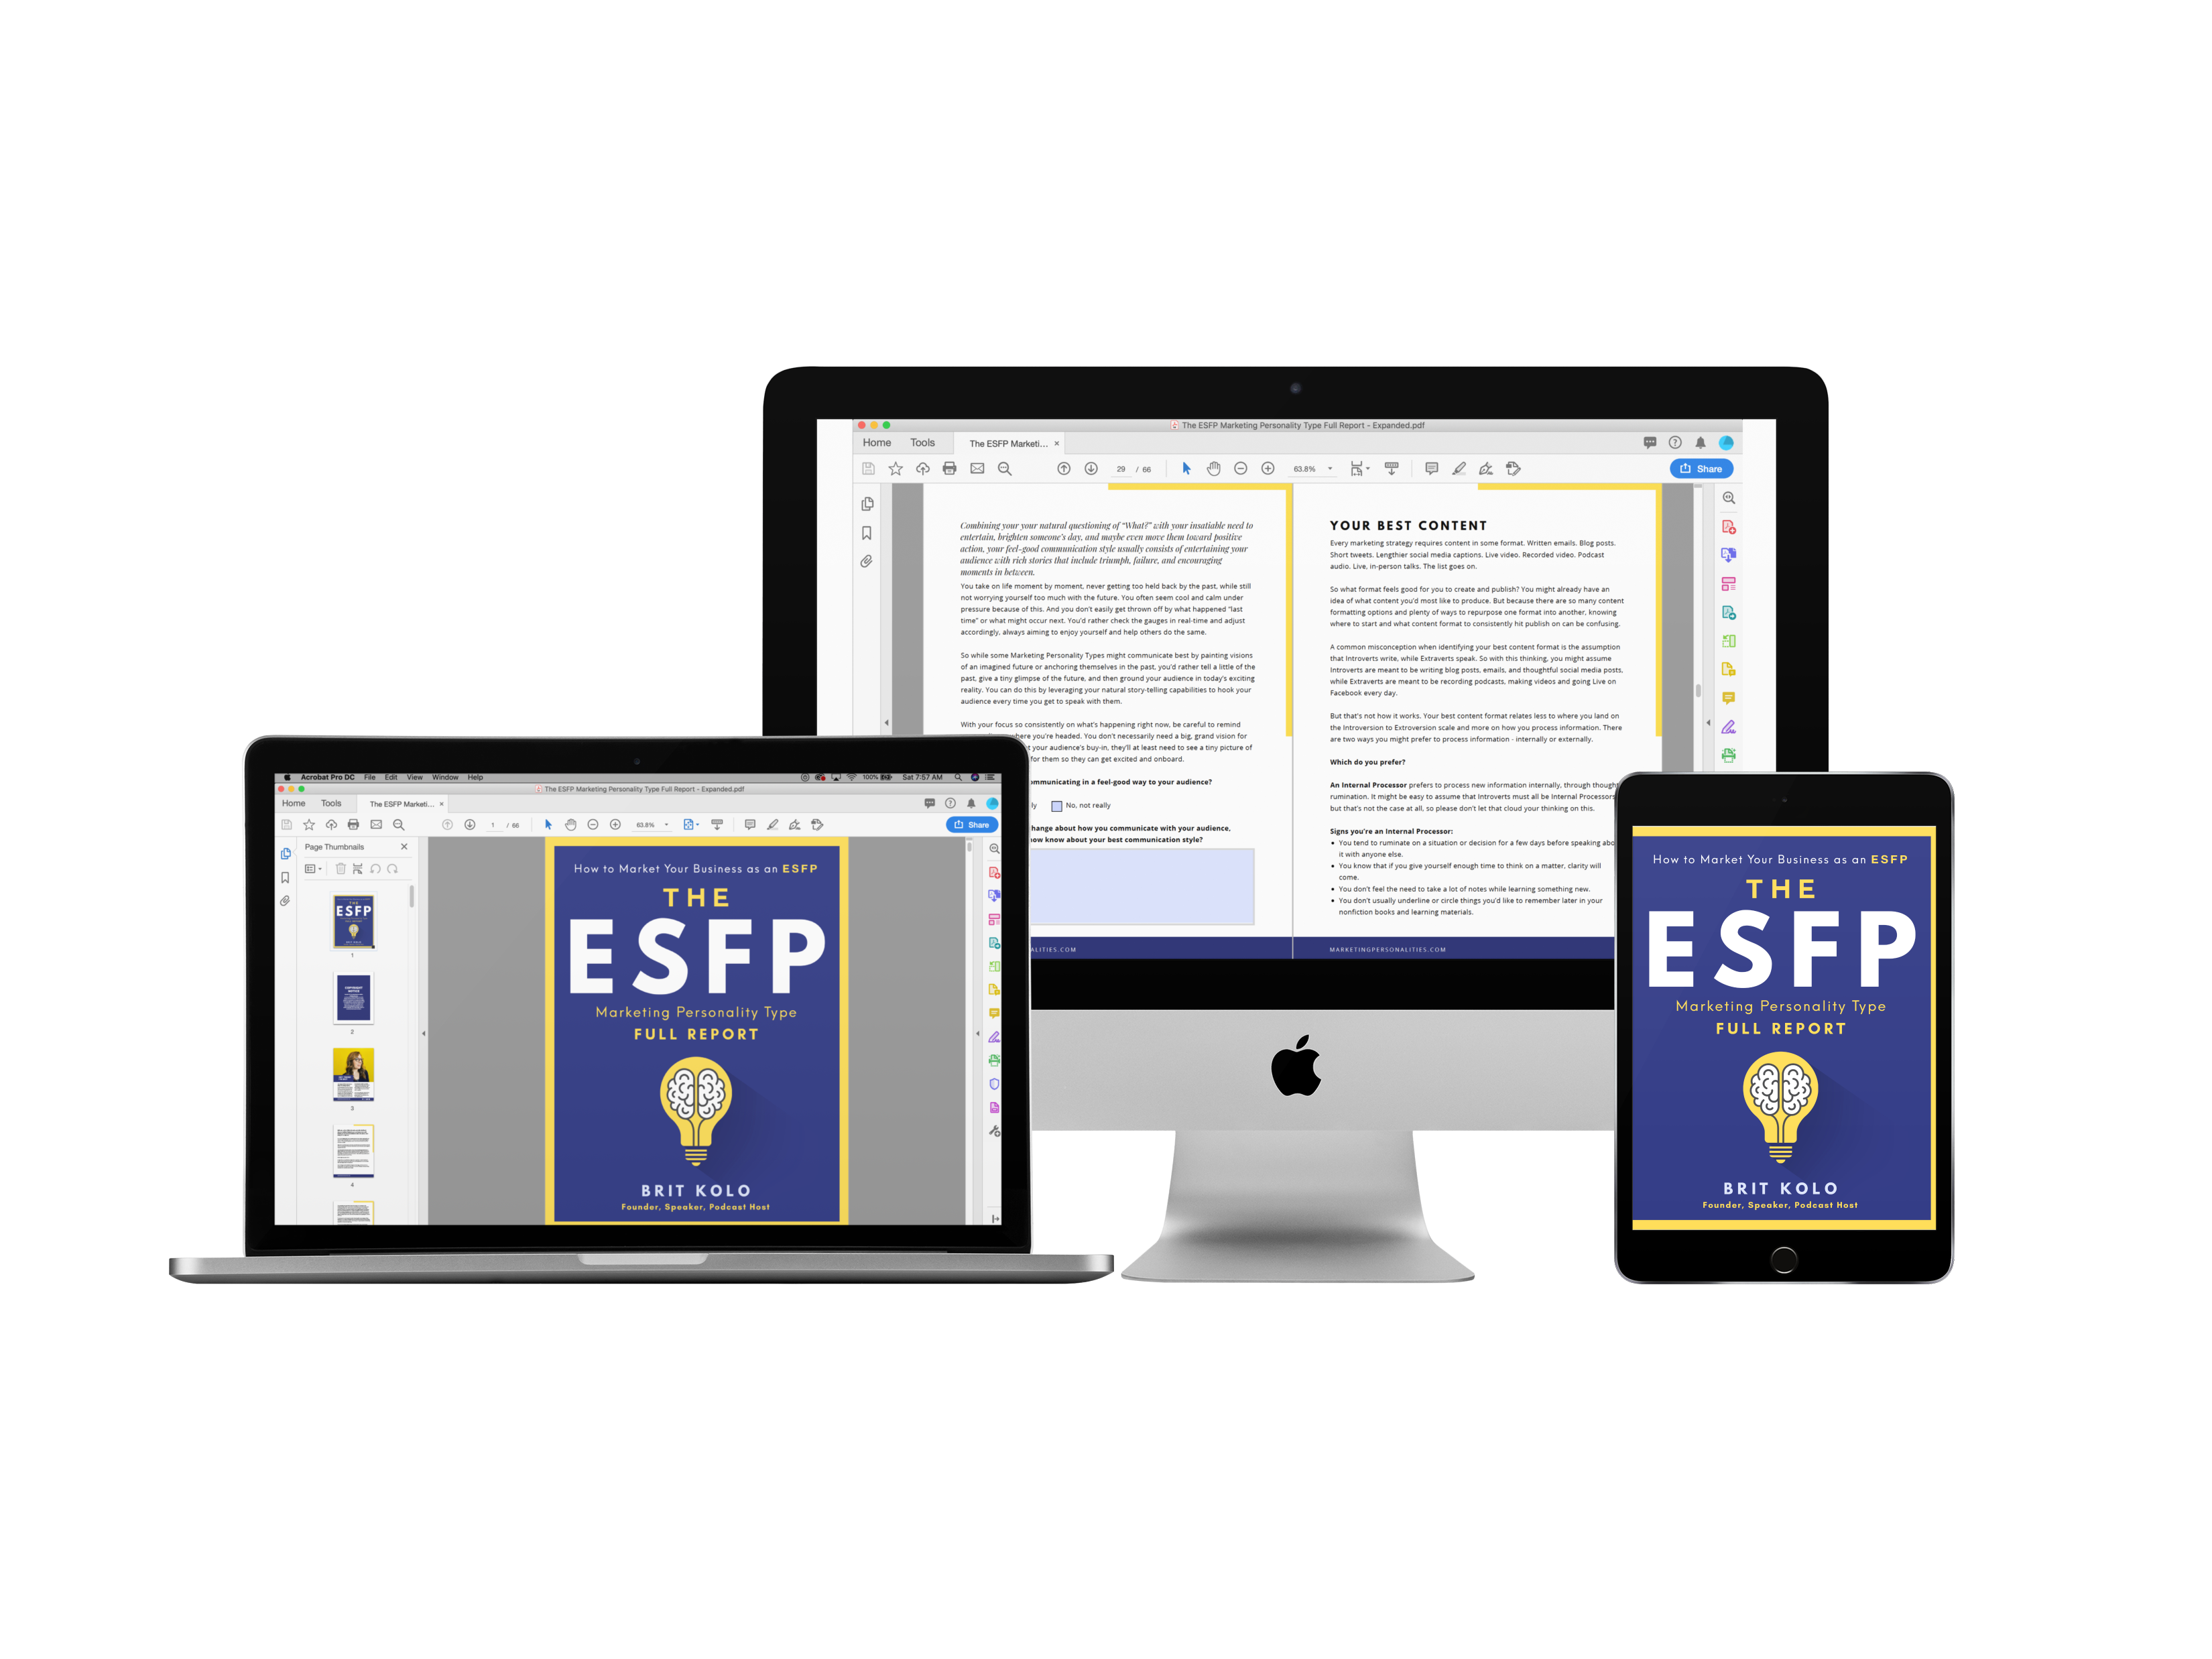 ESFP Marketing Personality Type Full Report Product